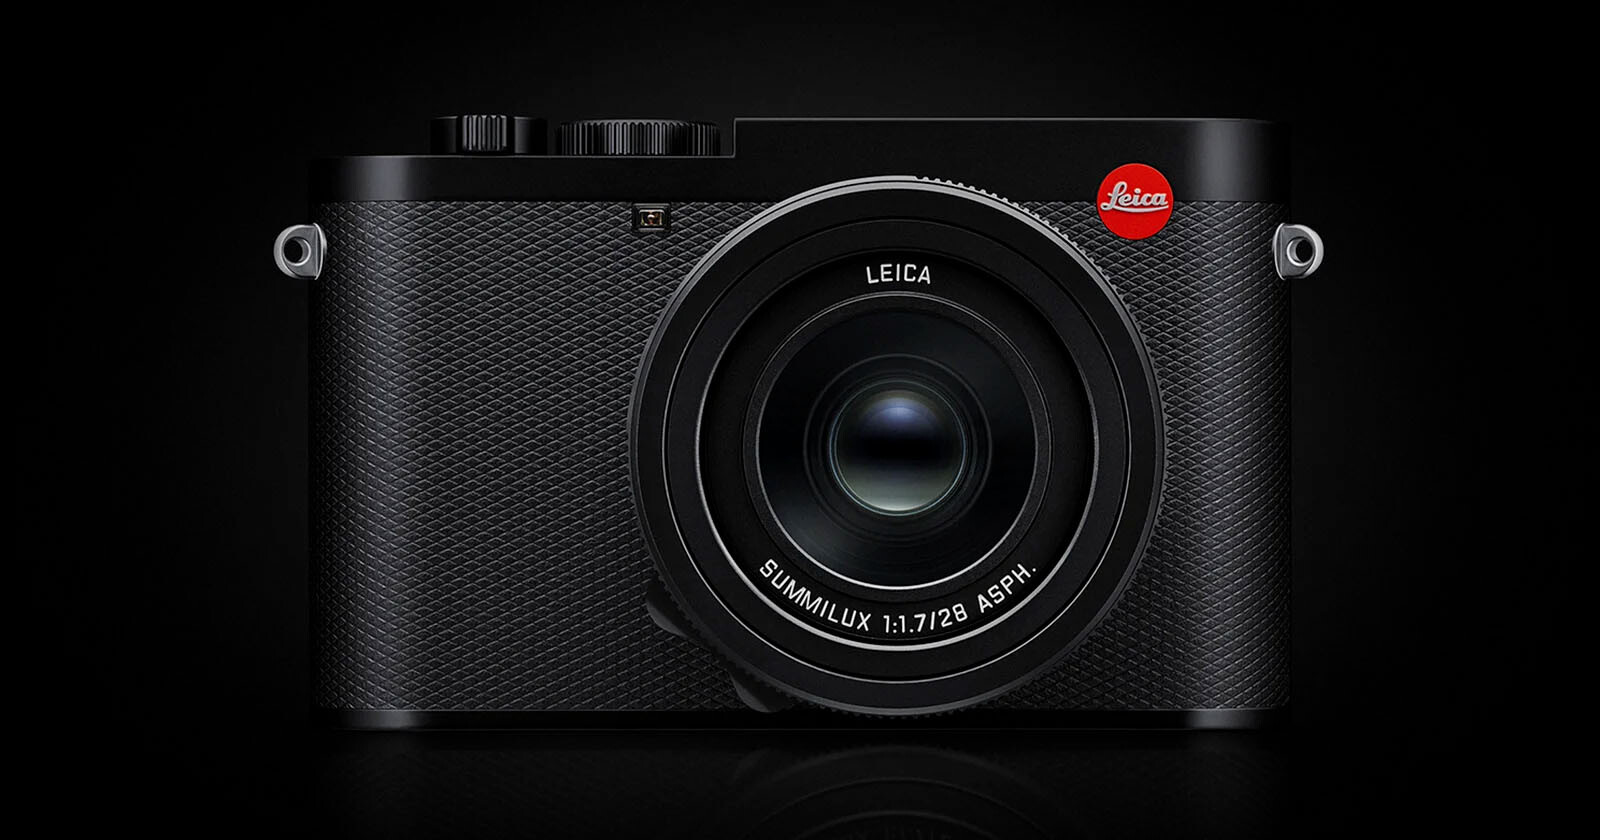 Leicas Q Series Always Used a Leaf Shutter, But It Went Unnoticed Till Now